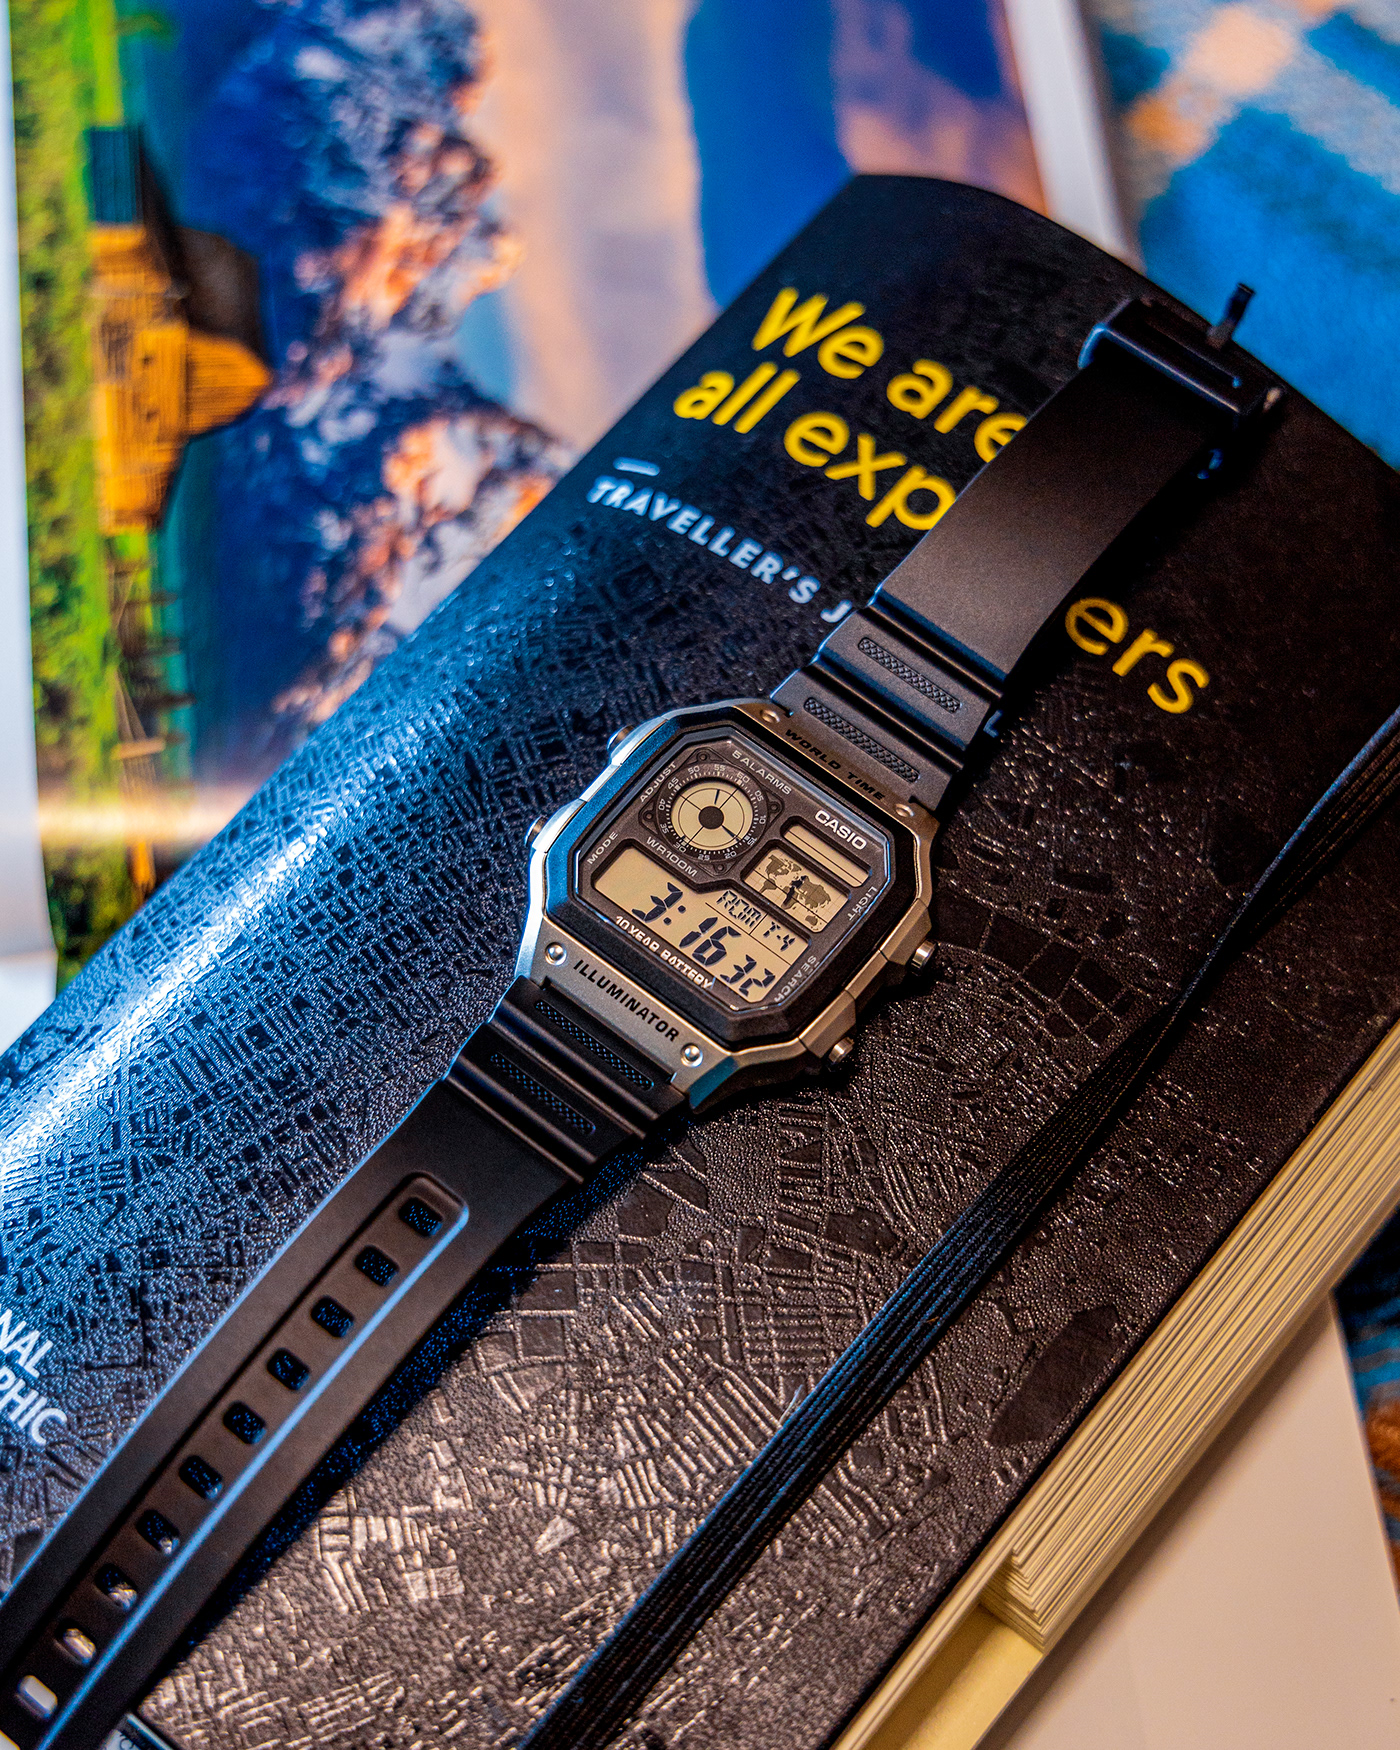 Advertising  Casio Casio Watches national geographic photographer product Product Photography still life watch watch photography